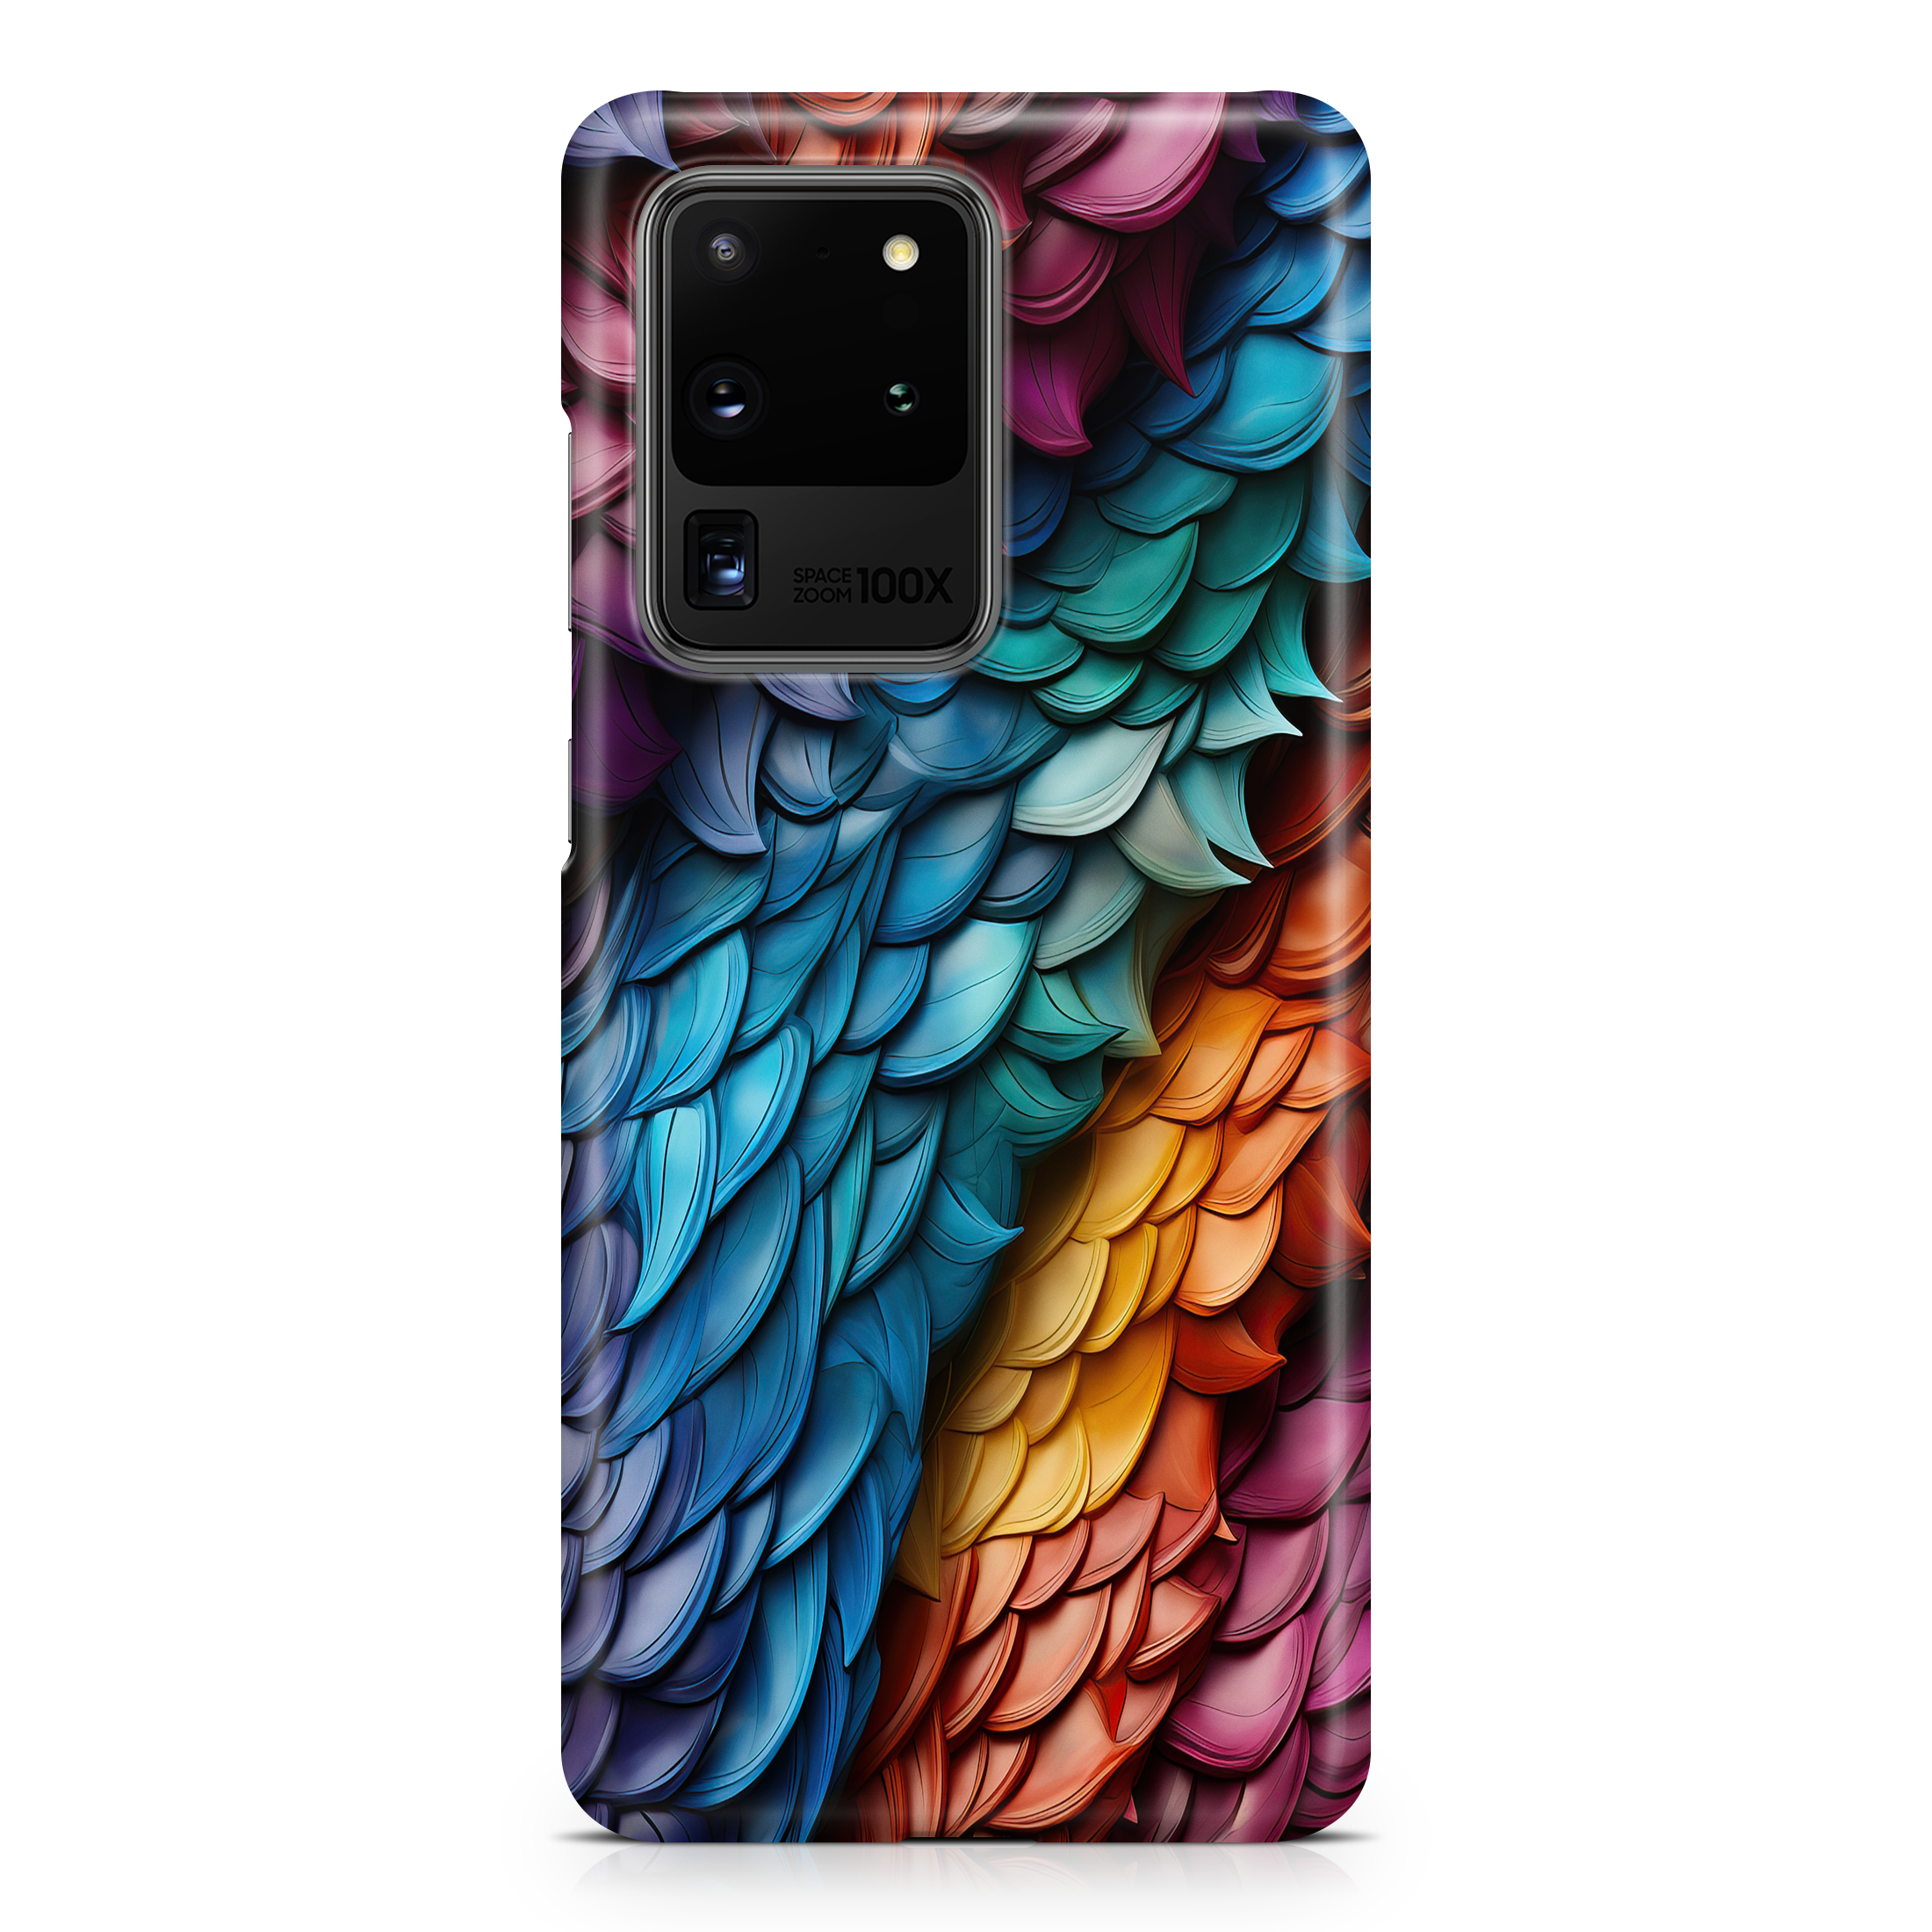 Rainbow Dragonscale - Samsung phone case designs by CaseSwagger